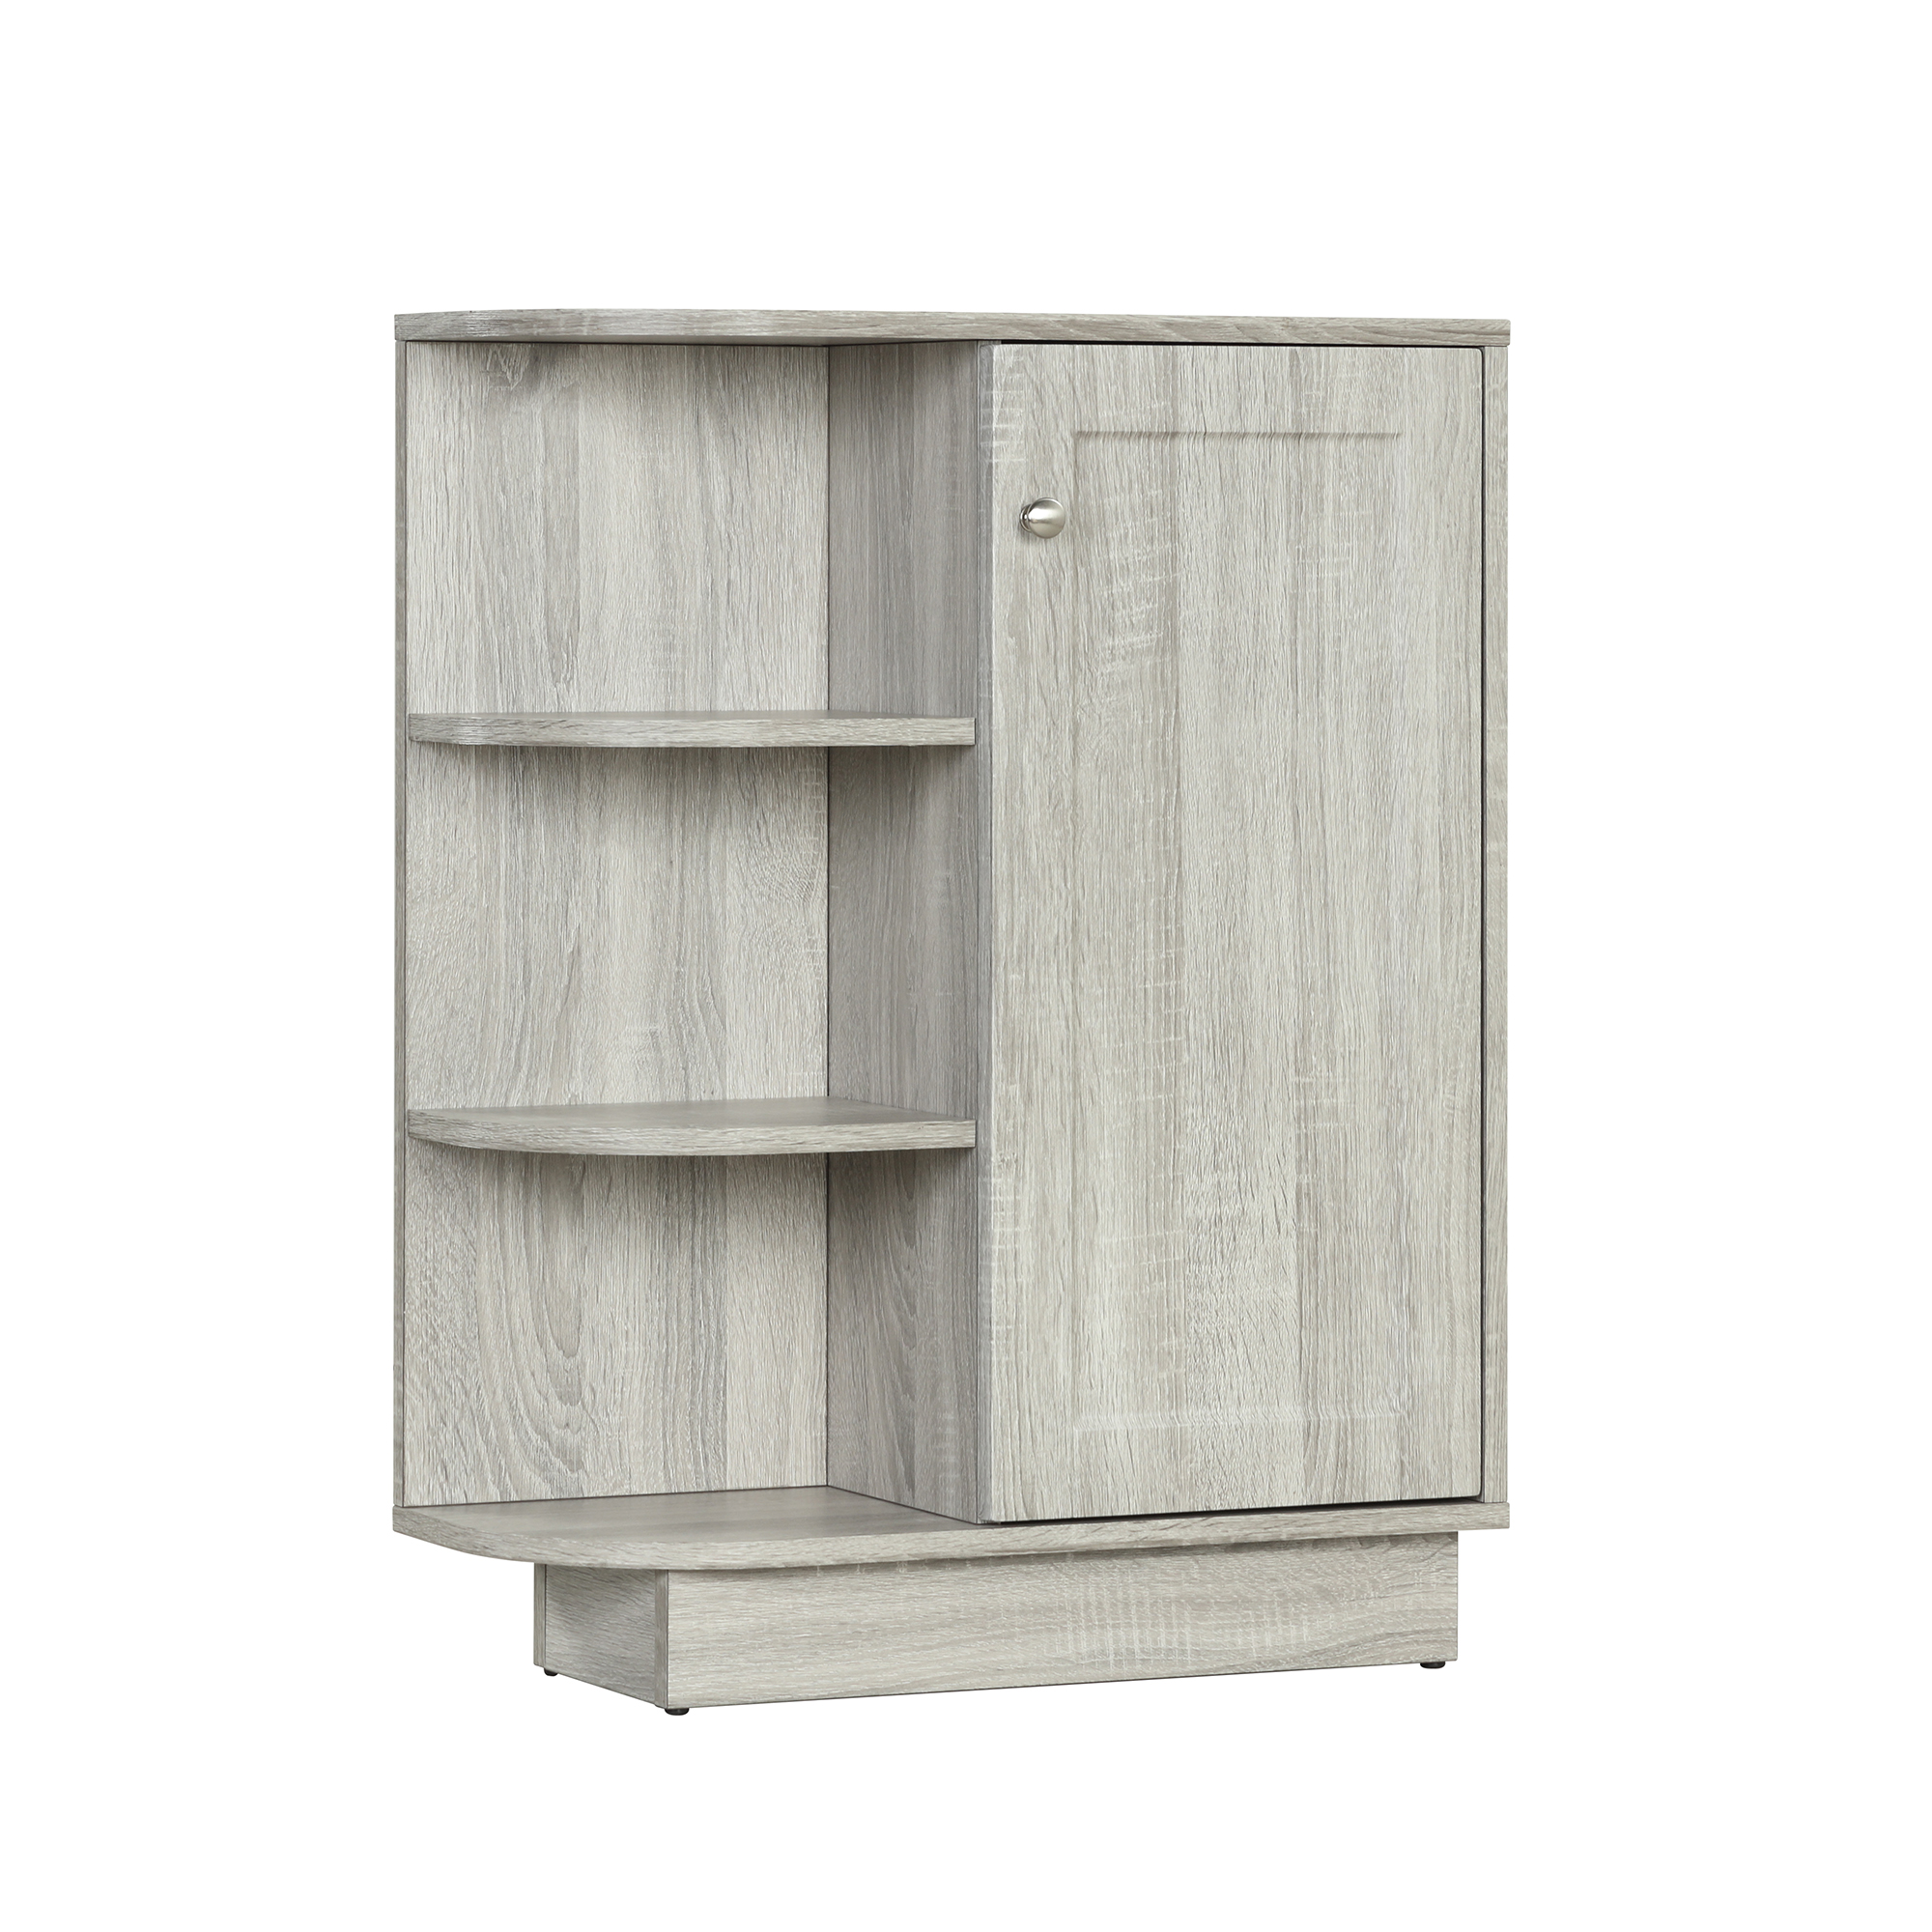 Open Style Shelf Cabinet with Adjustable Plates - WF291466AAL